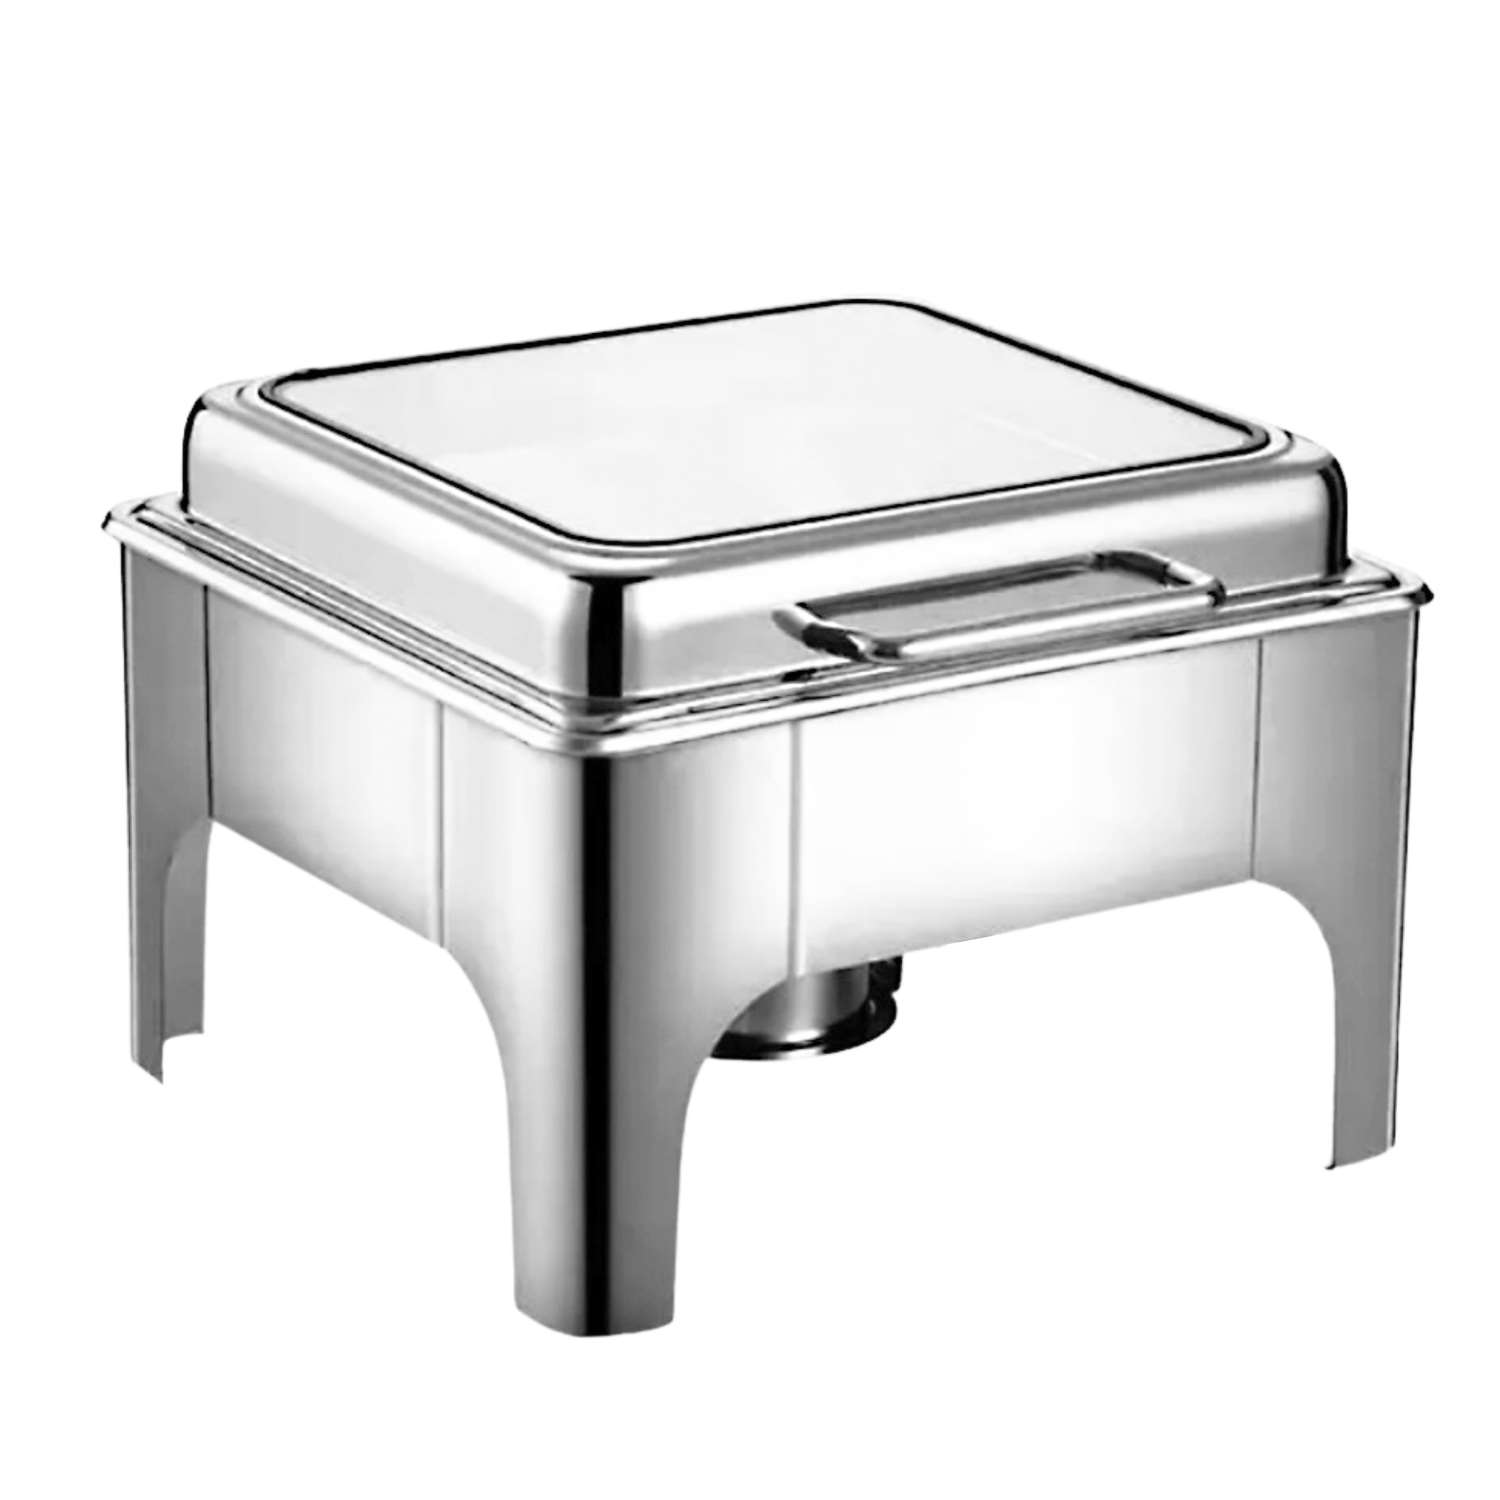 Chefset Stainless Steel Hydraulic Square-steel-6 Liter